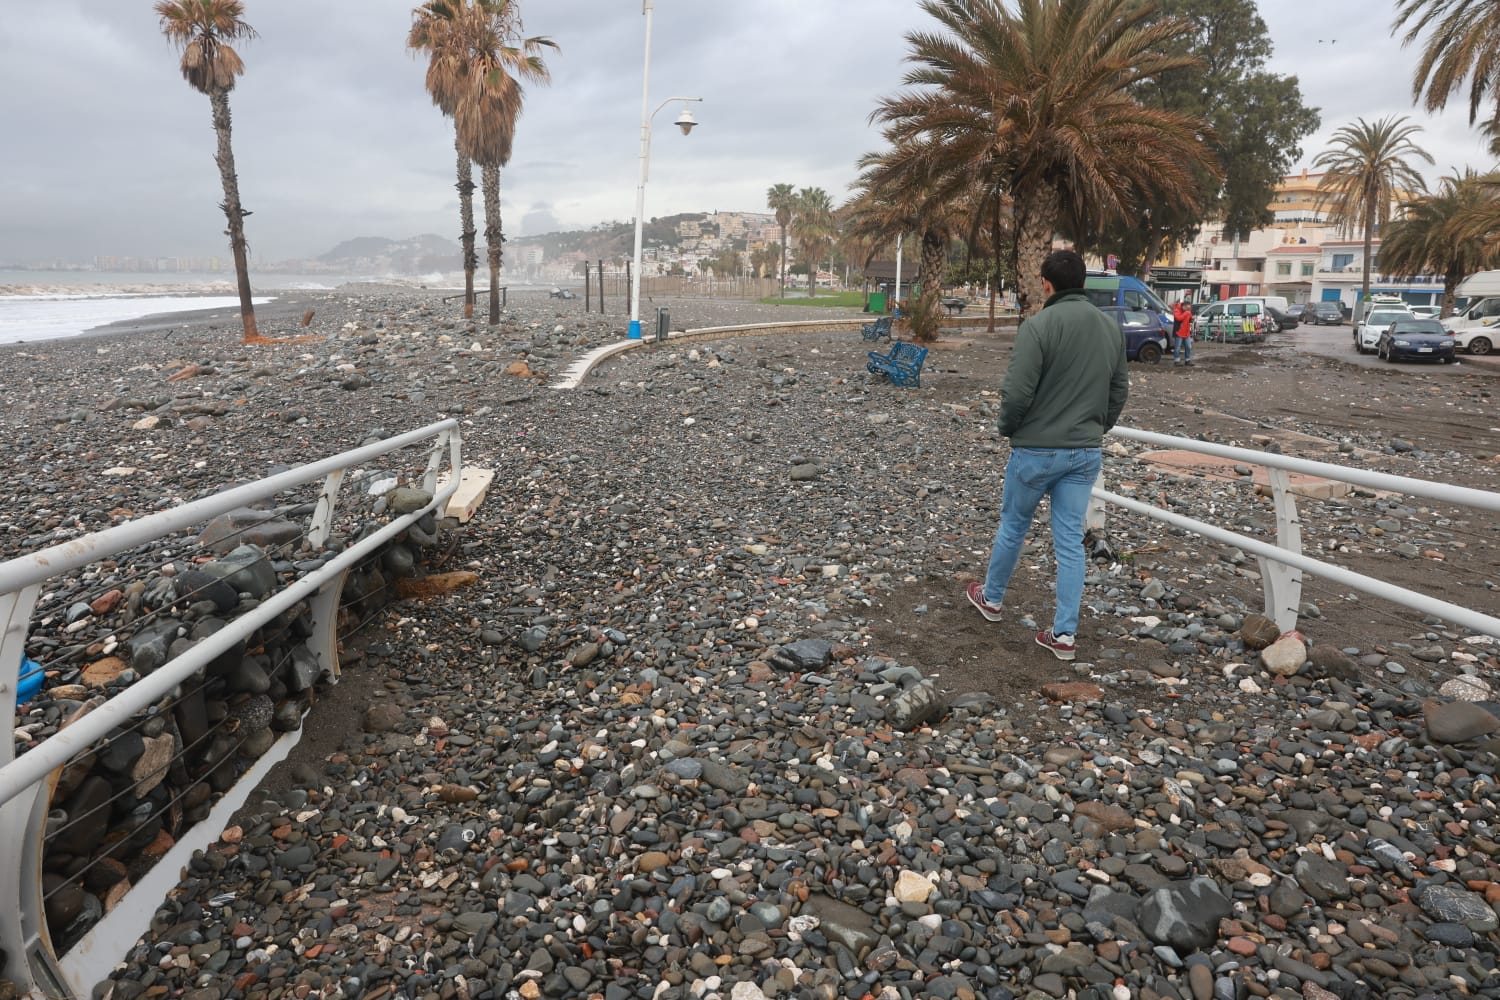 Picture roundup of the storm damage to the Costa del Sol's beaches